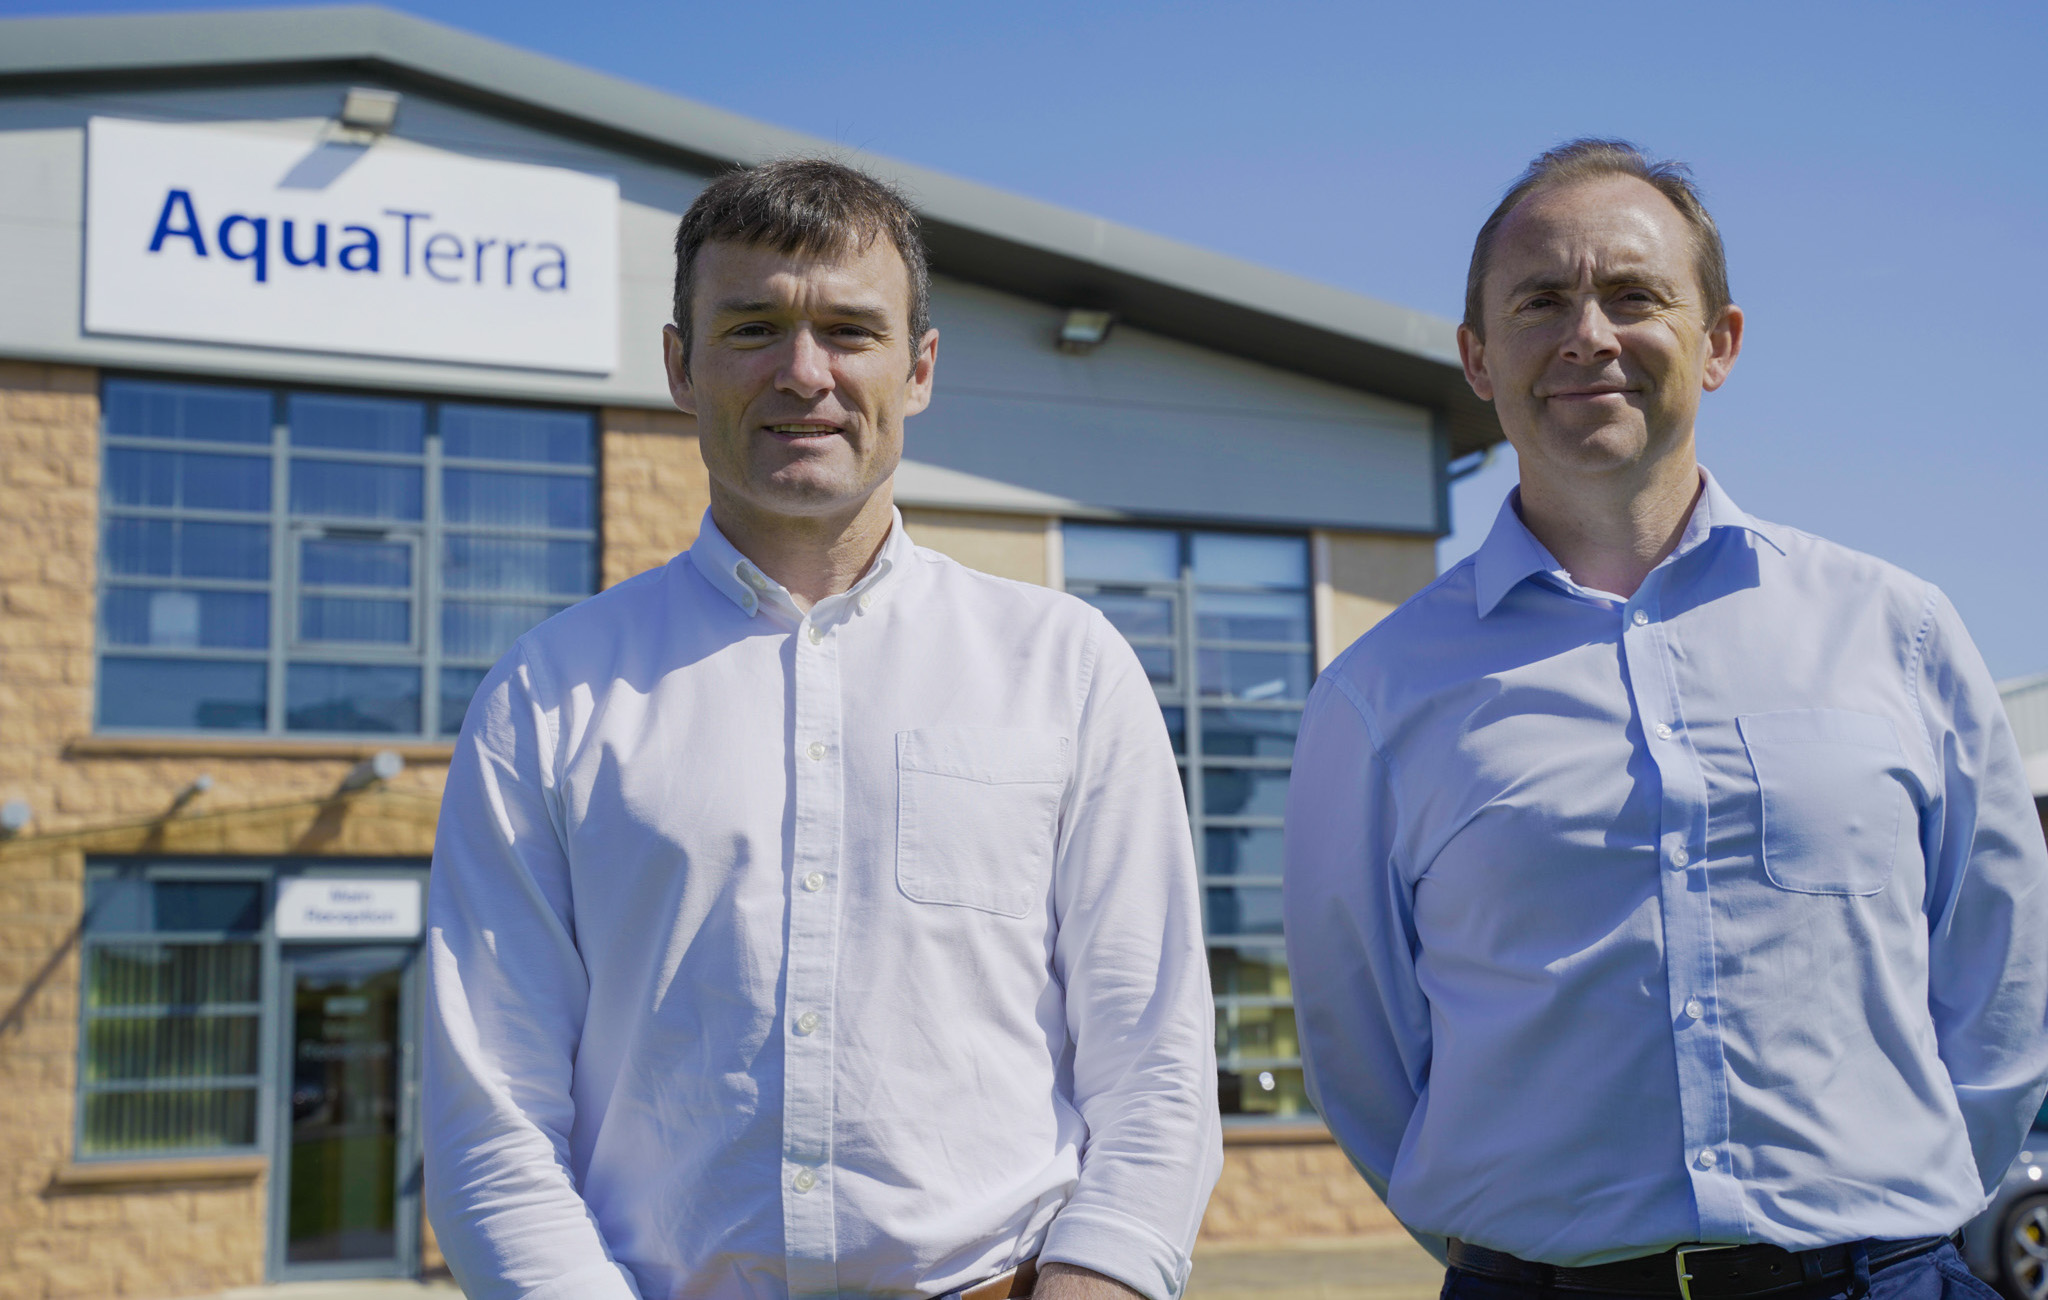 AquaTerra Group poised to double turnover to £14m